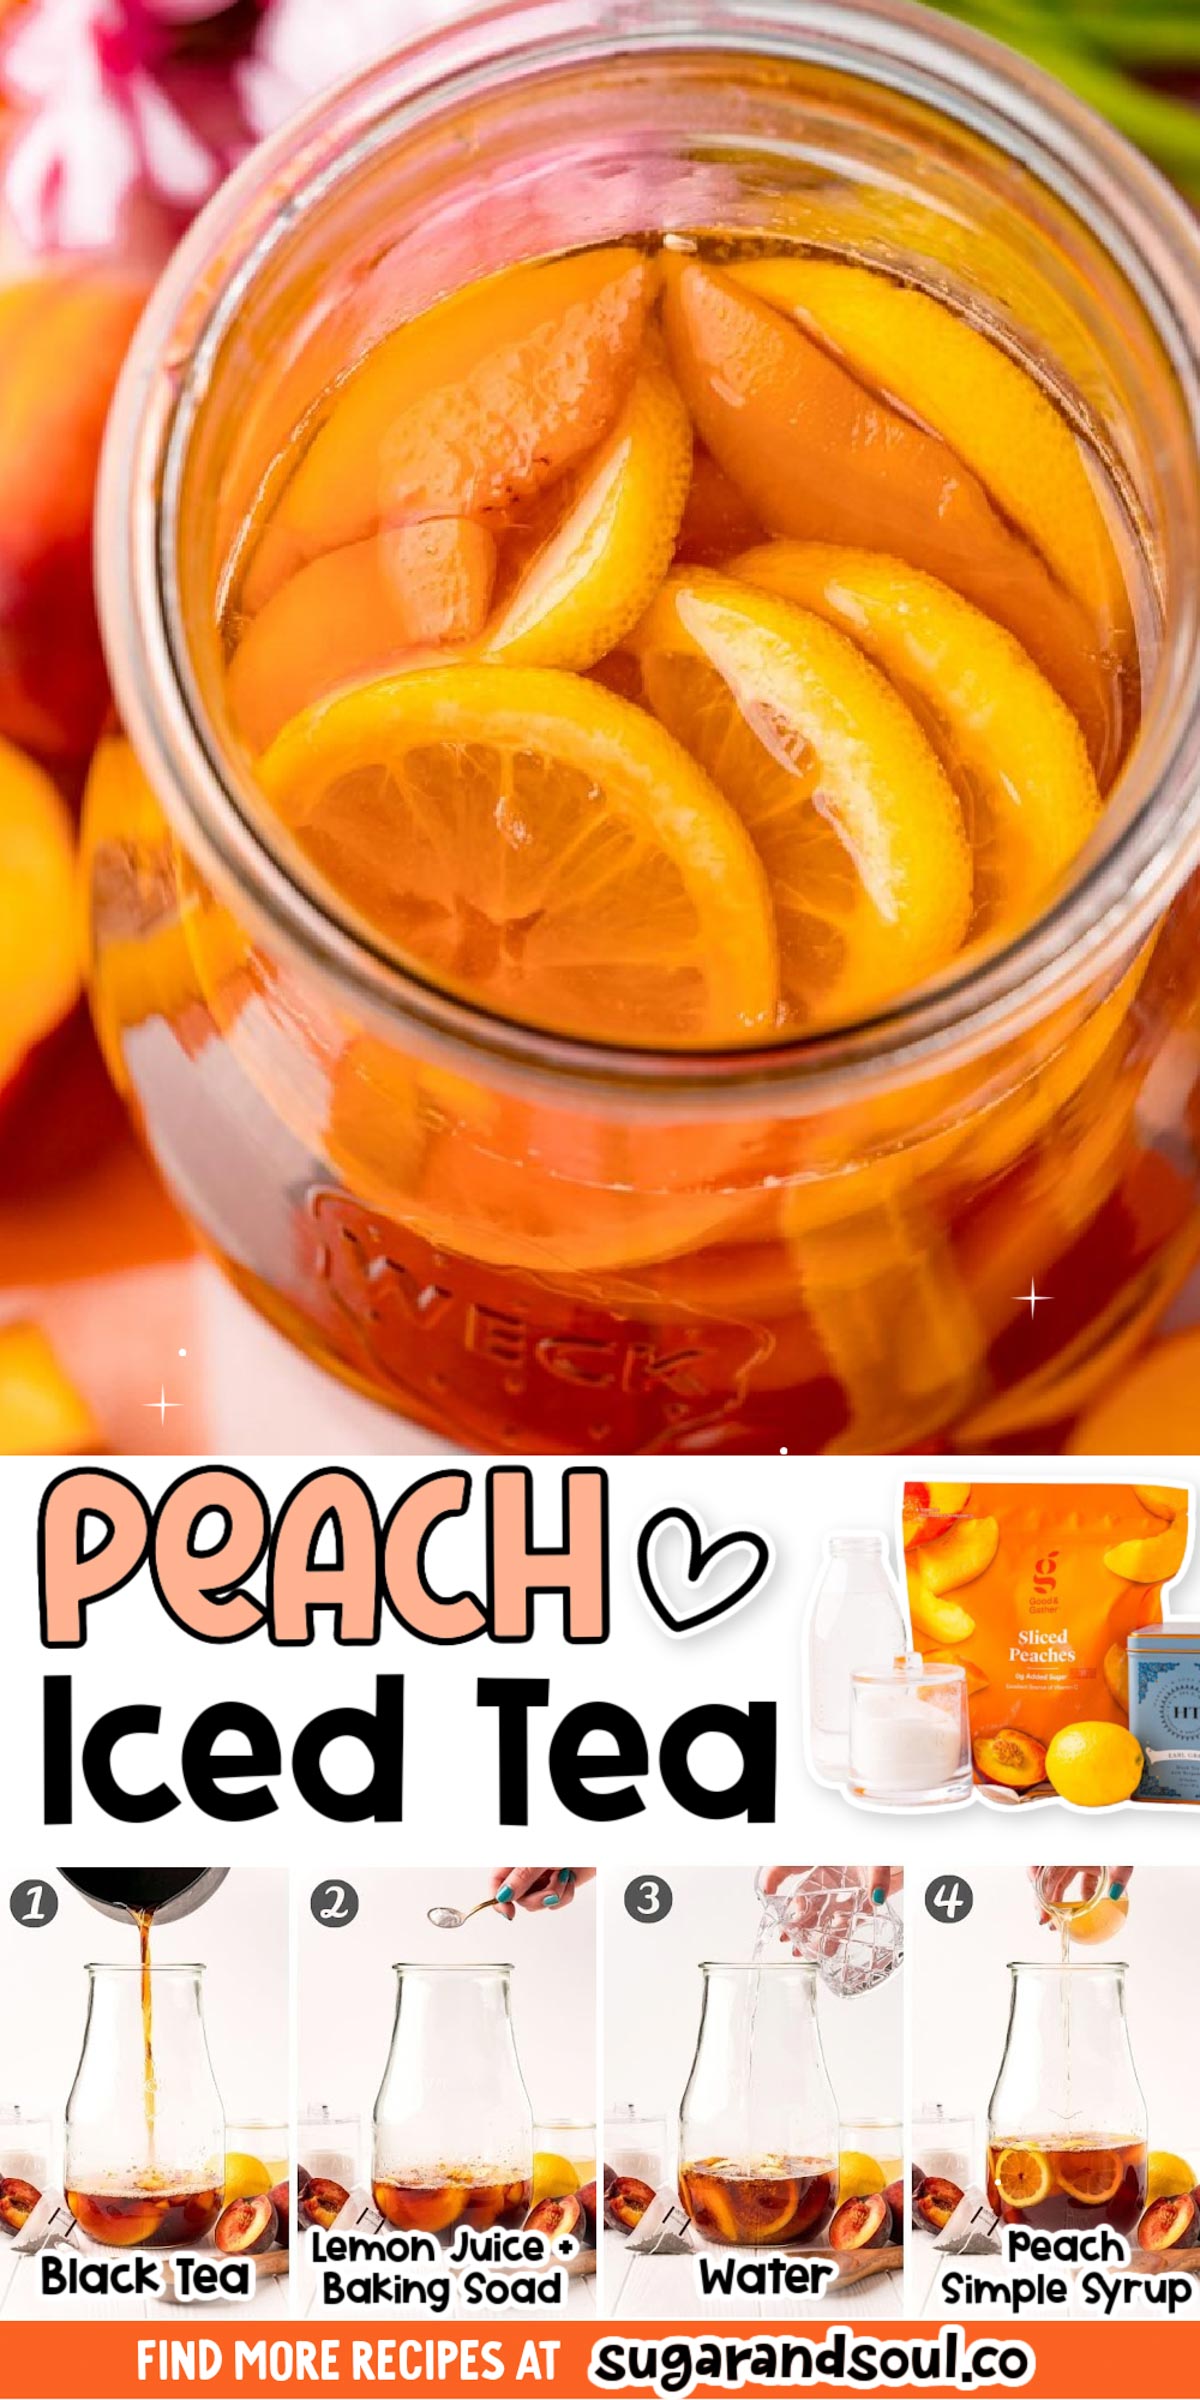 Peach Iced Tea mixes freshly steeped tea with homemade peach simple syrup for the perfect summertime drink that you'll instantly love! via @sugarandsoulco